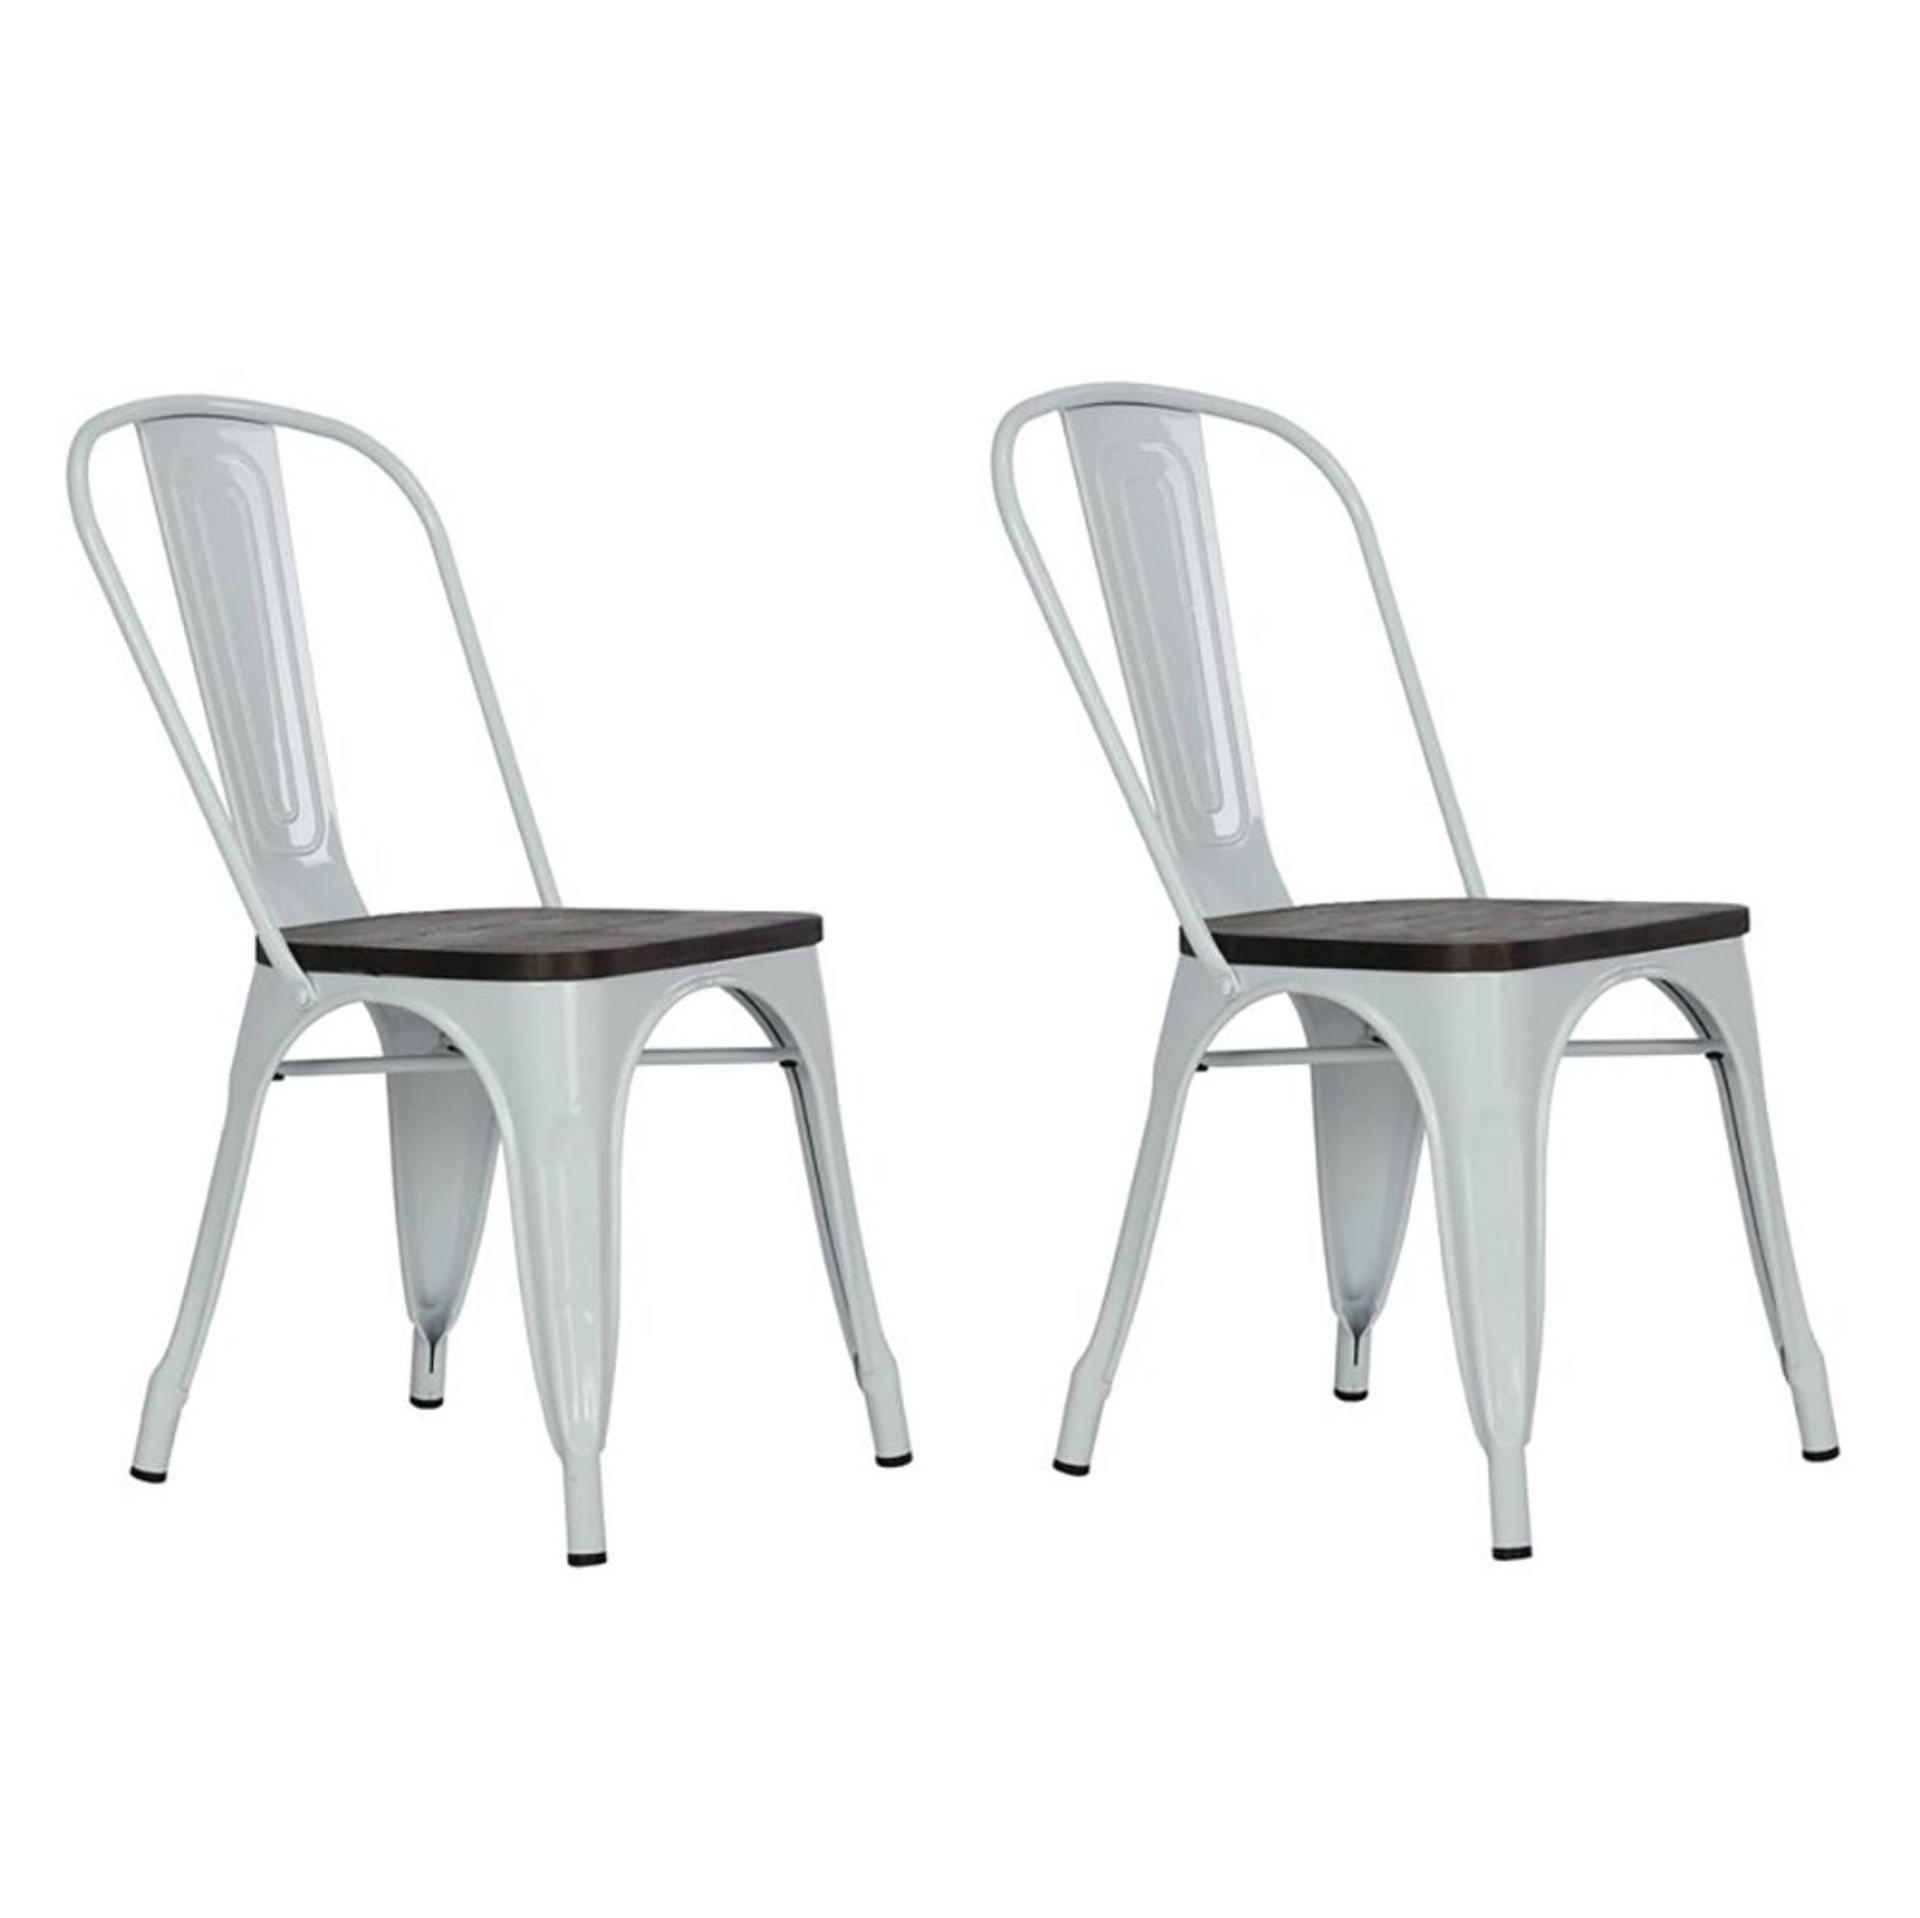 Trade lot 20 X Brand New Fusion Metal Dining Chair Antique White, Enchant your guests with the